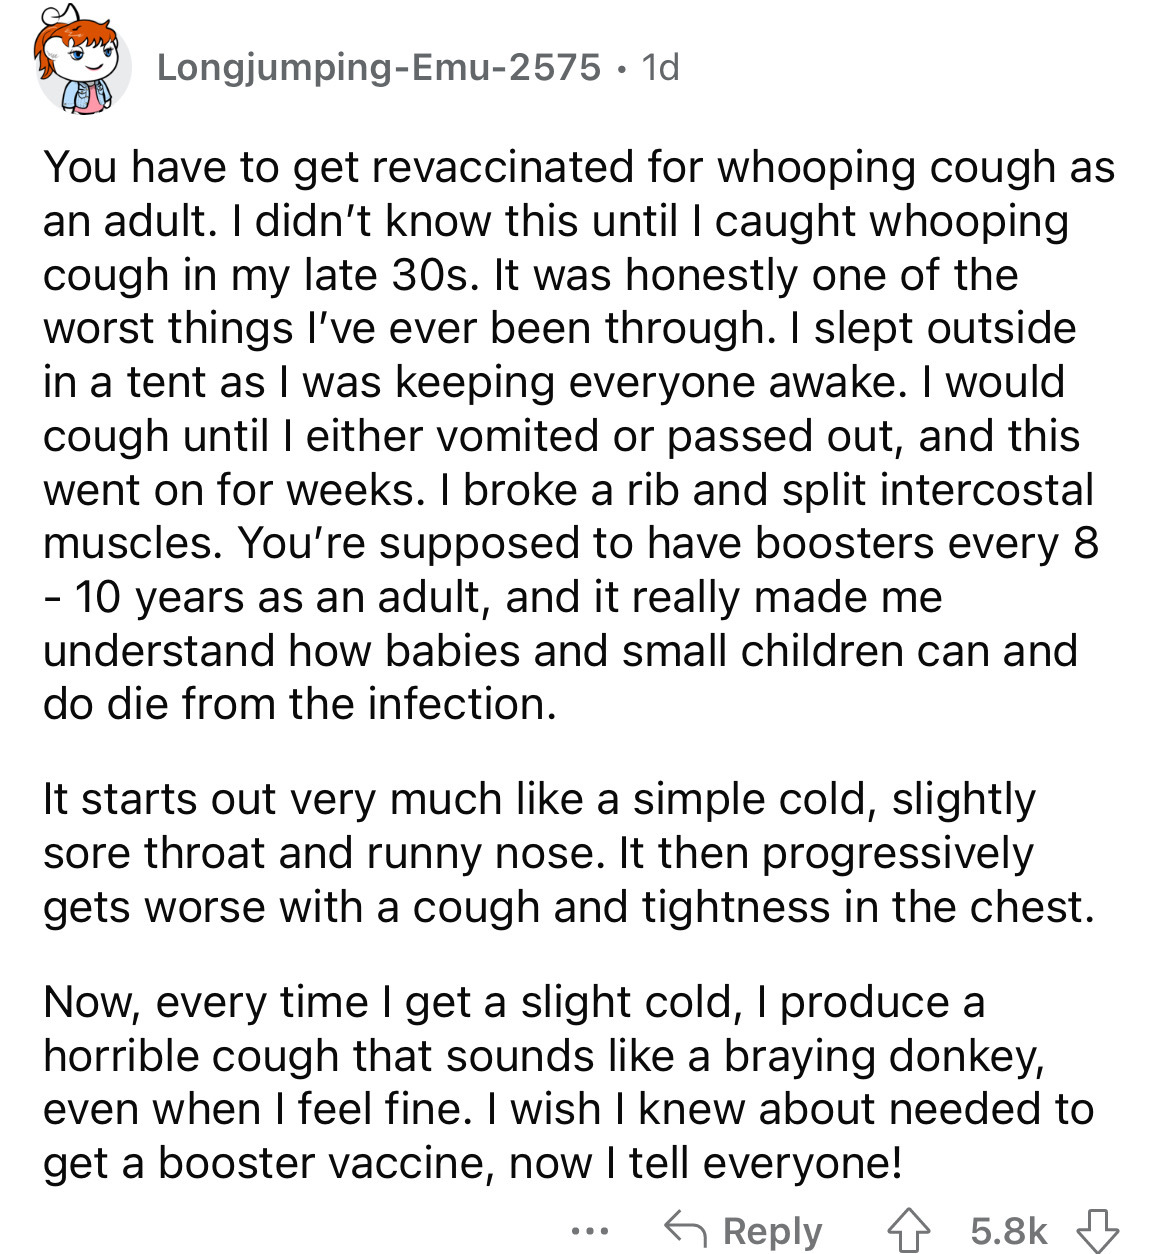 document - LongjumpingEmu2575 1d You have to get revaccinated for whooping cough as an adult. I didn't know this until I caught whooping cough in my late 30s. It was honestly one of the worst things I've ever been through. I slept outside in a tent as I w